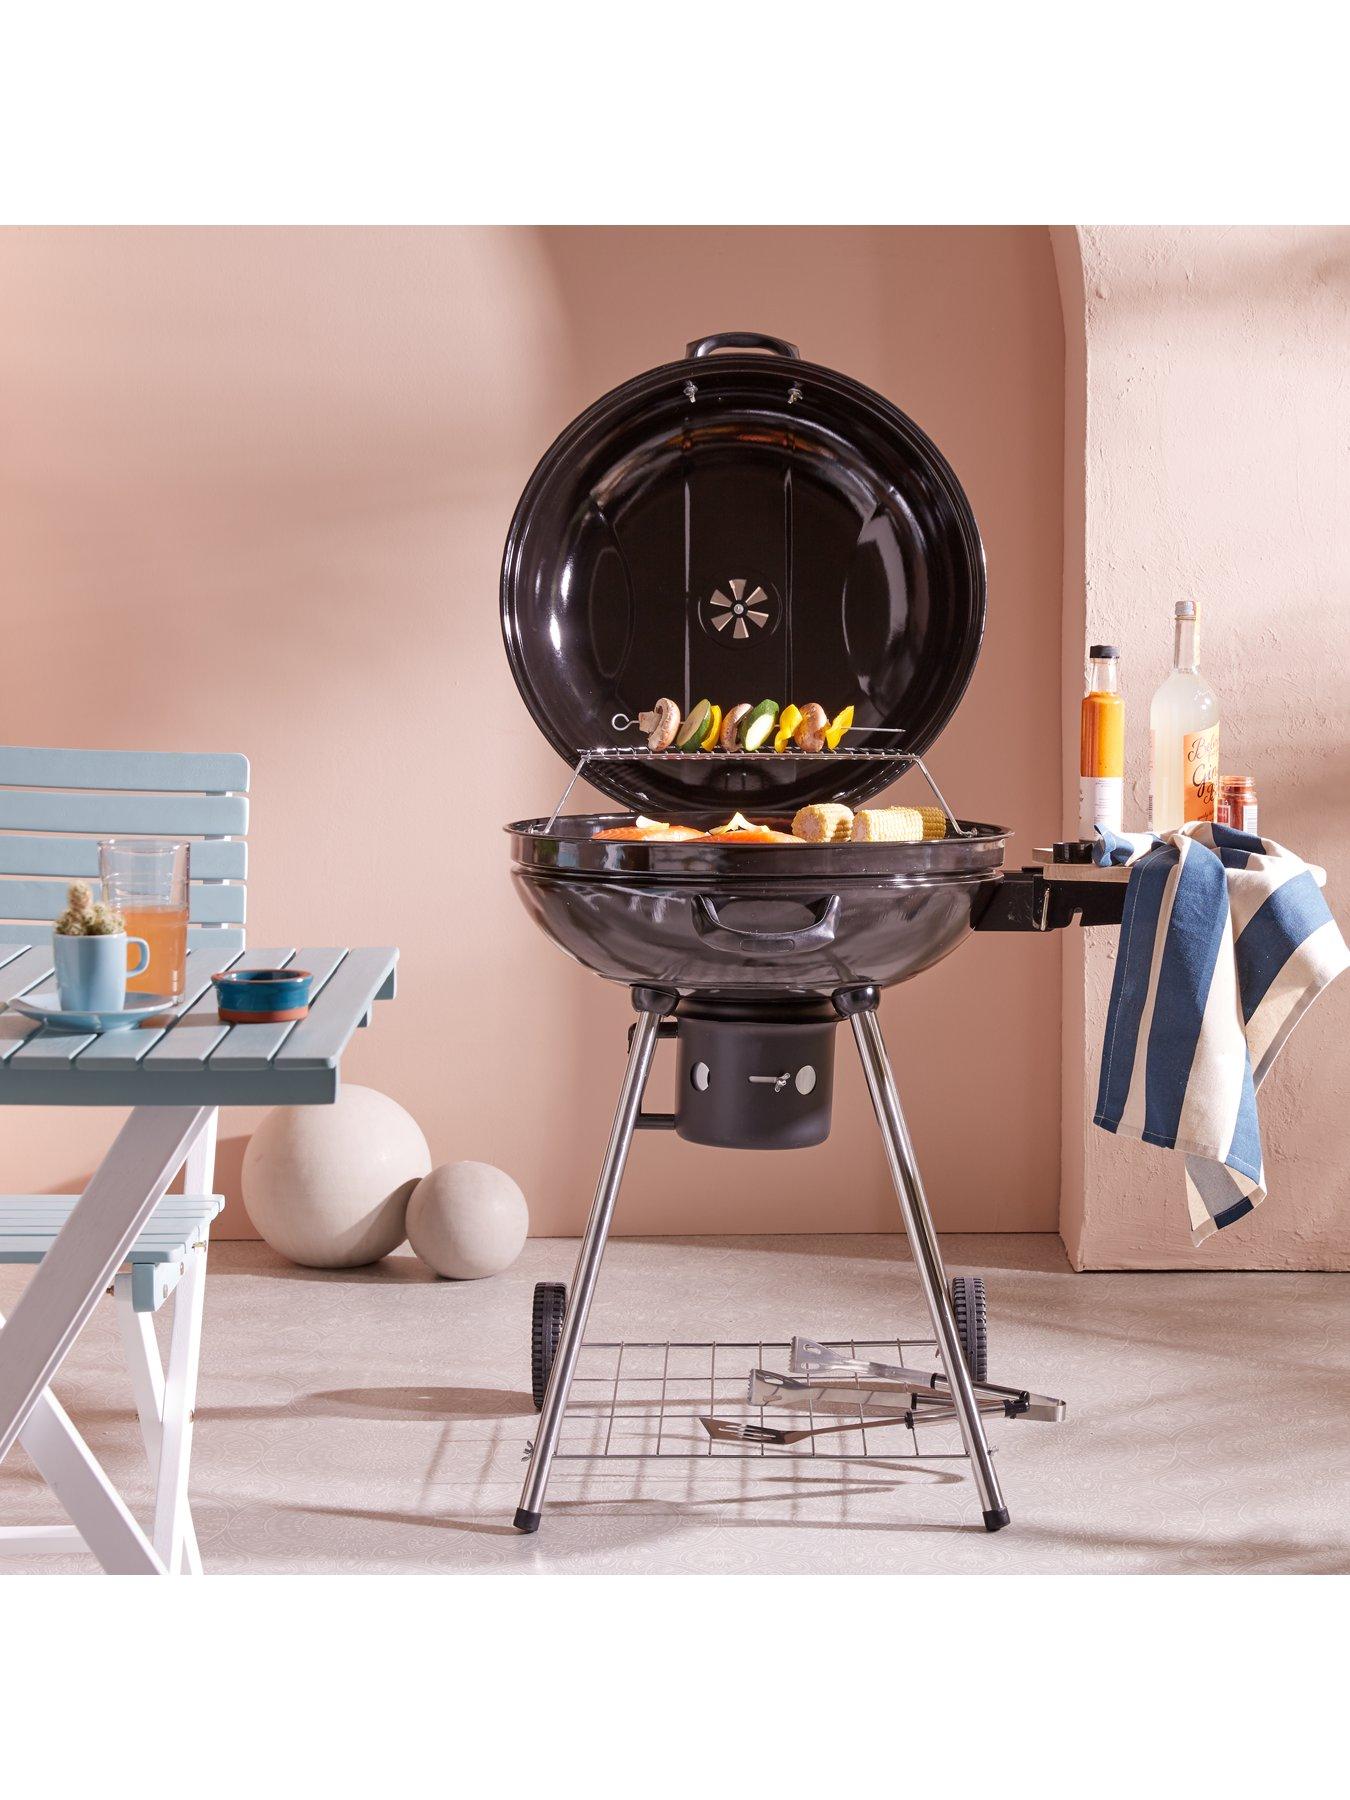 https://media.very.co.uk/i/very/LVRNQ_SQ1_0000000004_BLACK_RSr/22-inch-kettle-grill-charcoal-bbq-with-side-table-and-free-cover.jpg?$180x240_retinamobilex2$